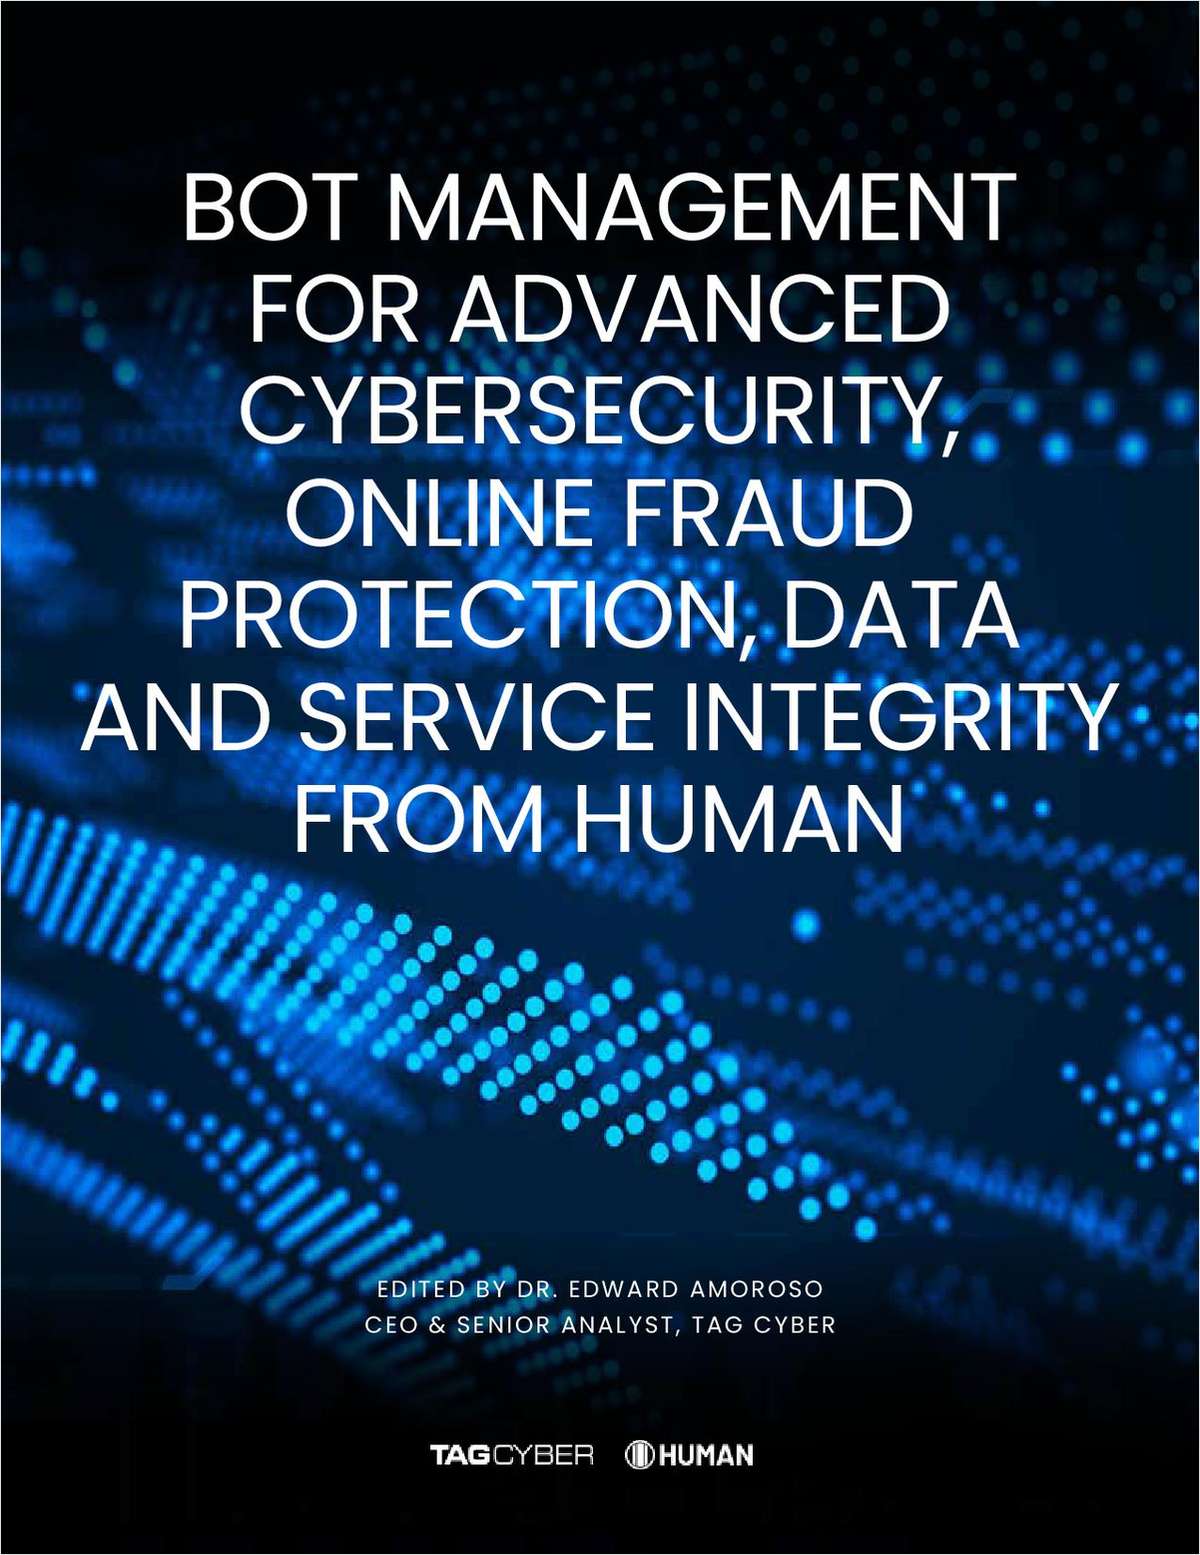 Bot Management for Advanced Cybersecurity, Online Fraud Protection, Data and Service Integrity from Human